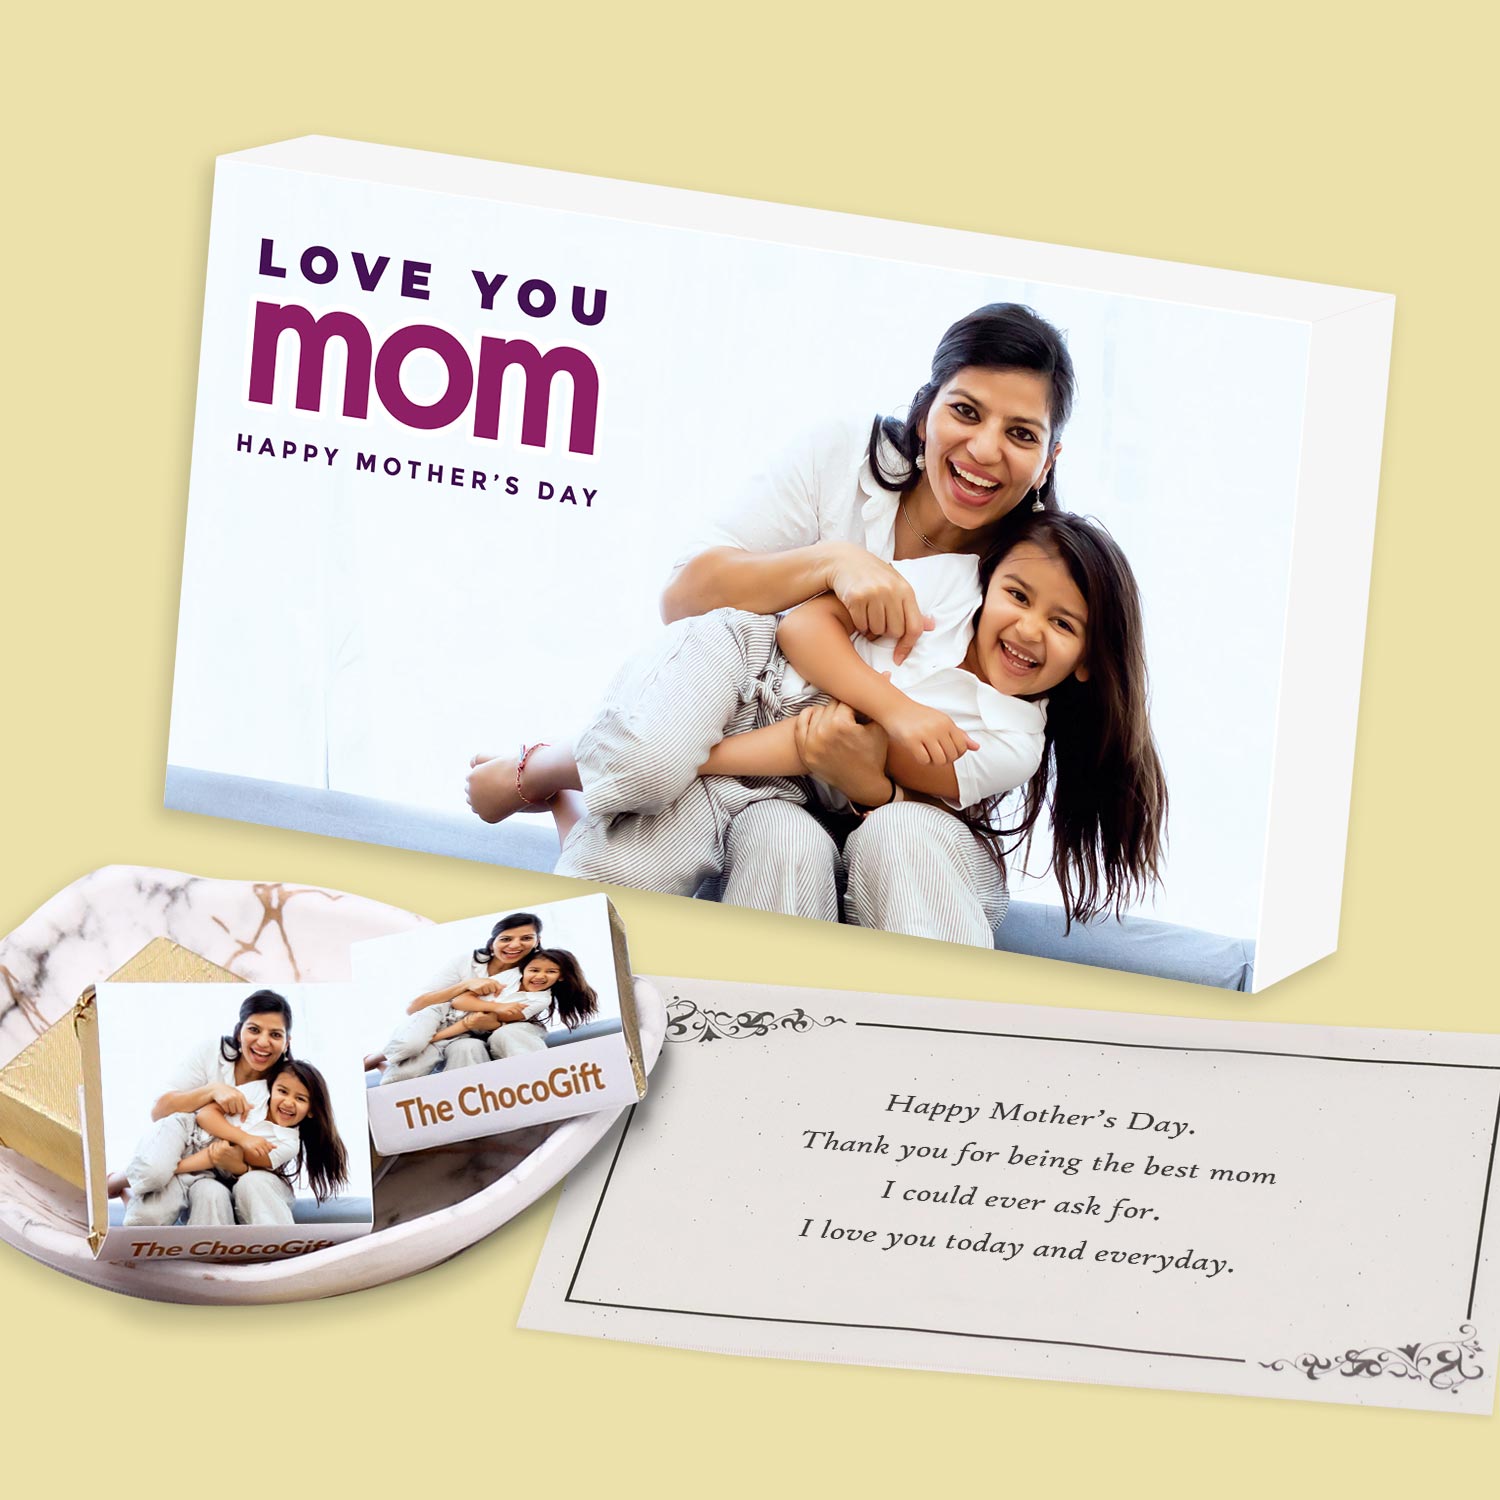 Online Gifts in Jaipur | Personalized Gifts in Jaipur - Giftcart.com